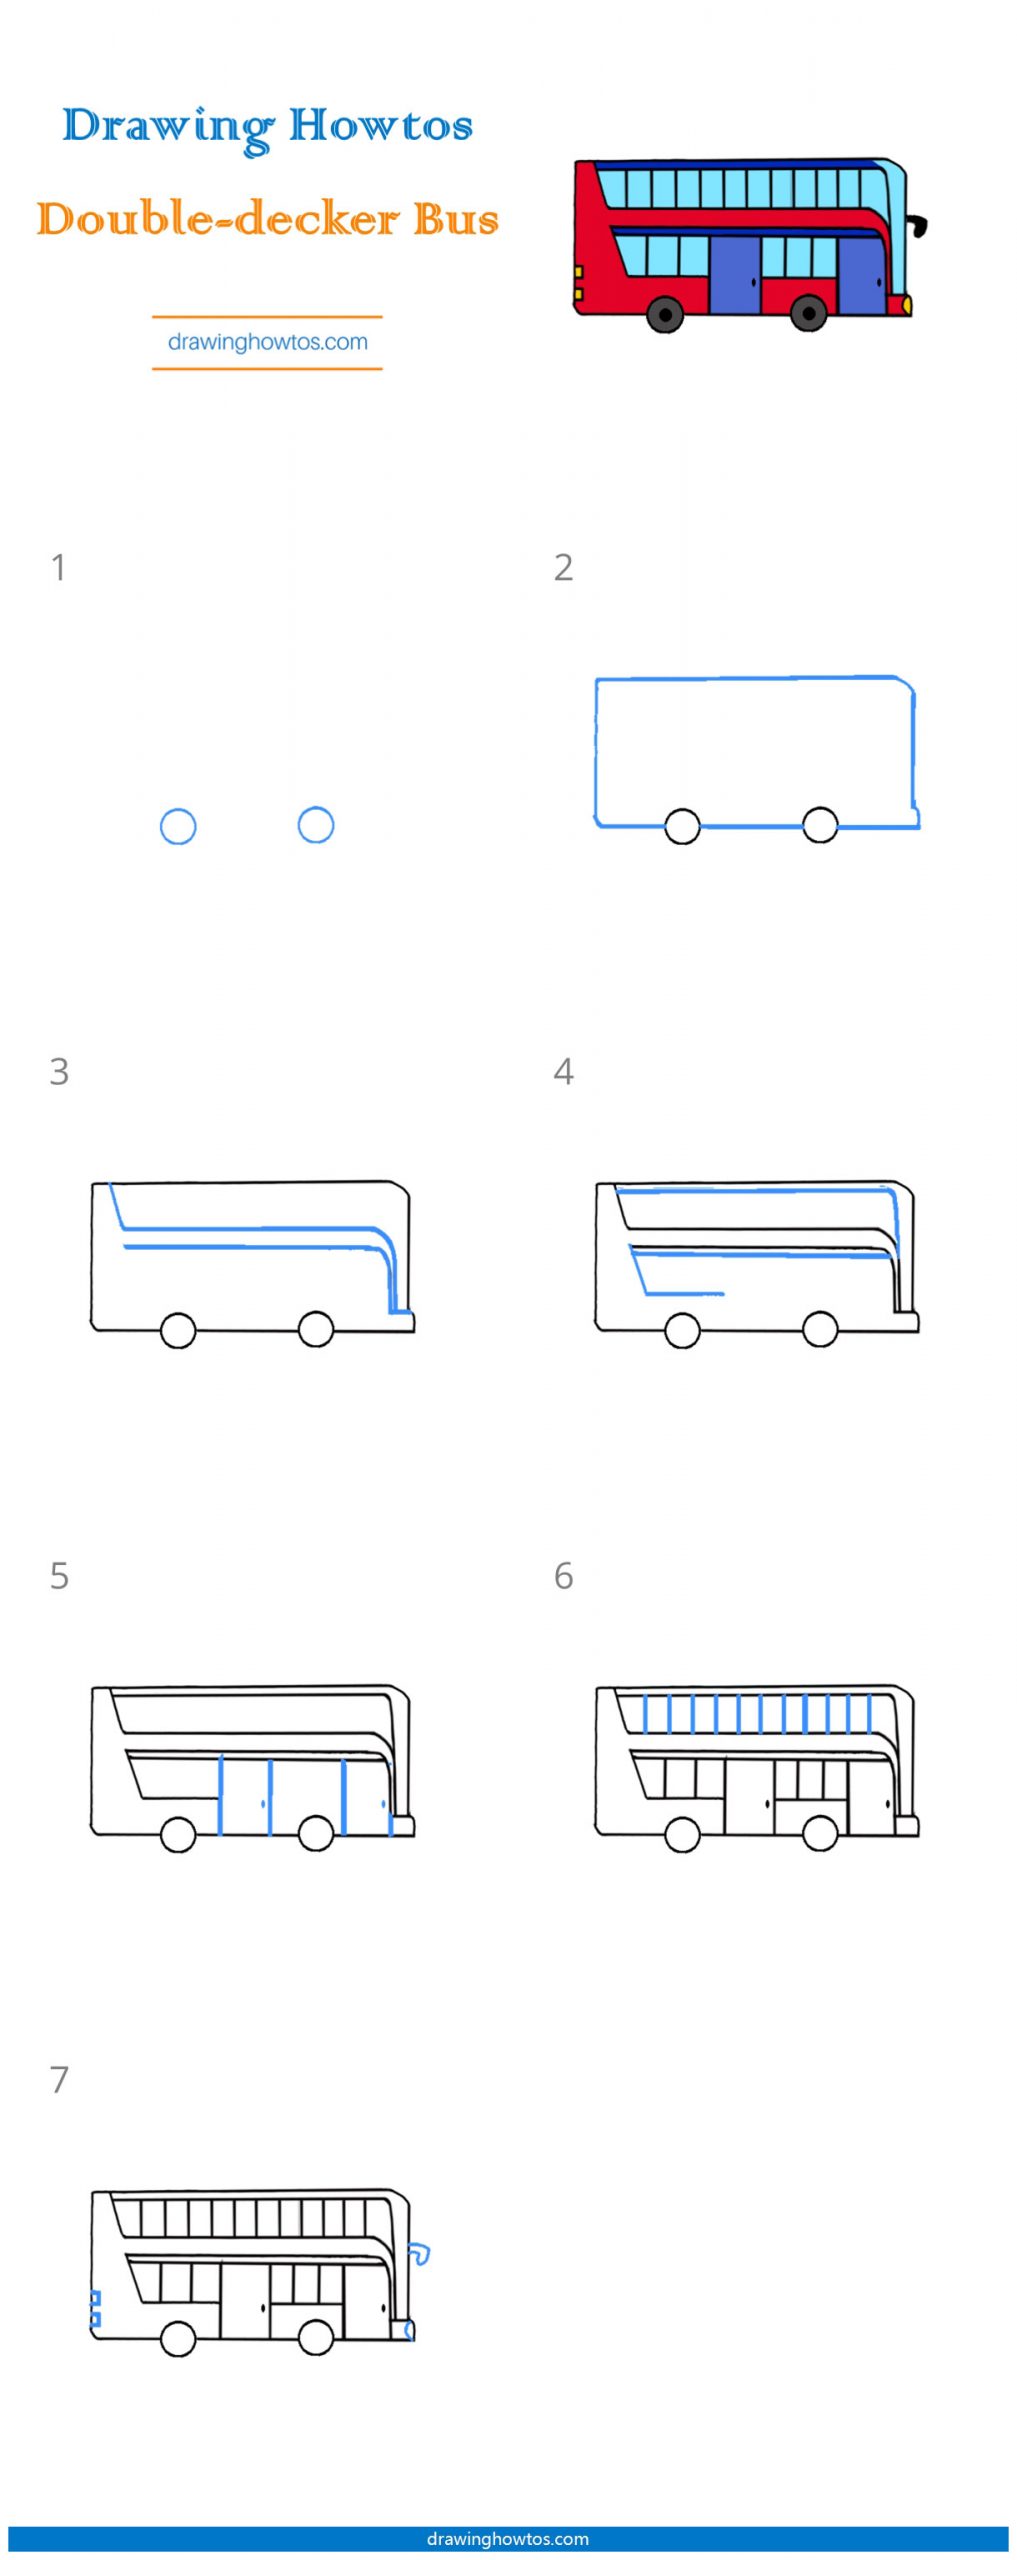 How to Draw a Double-Decker Bus Step by Step